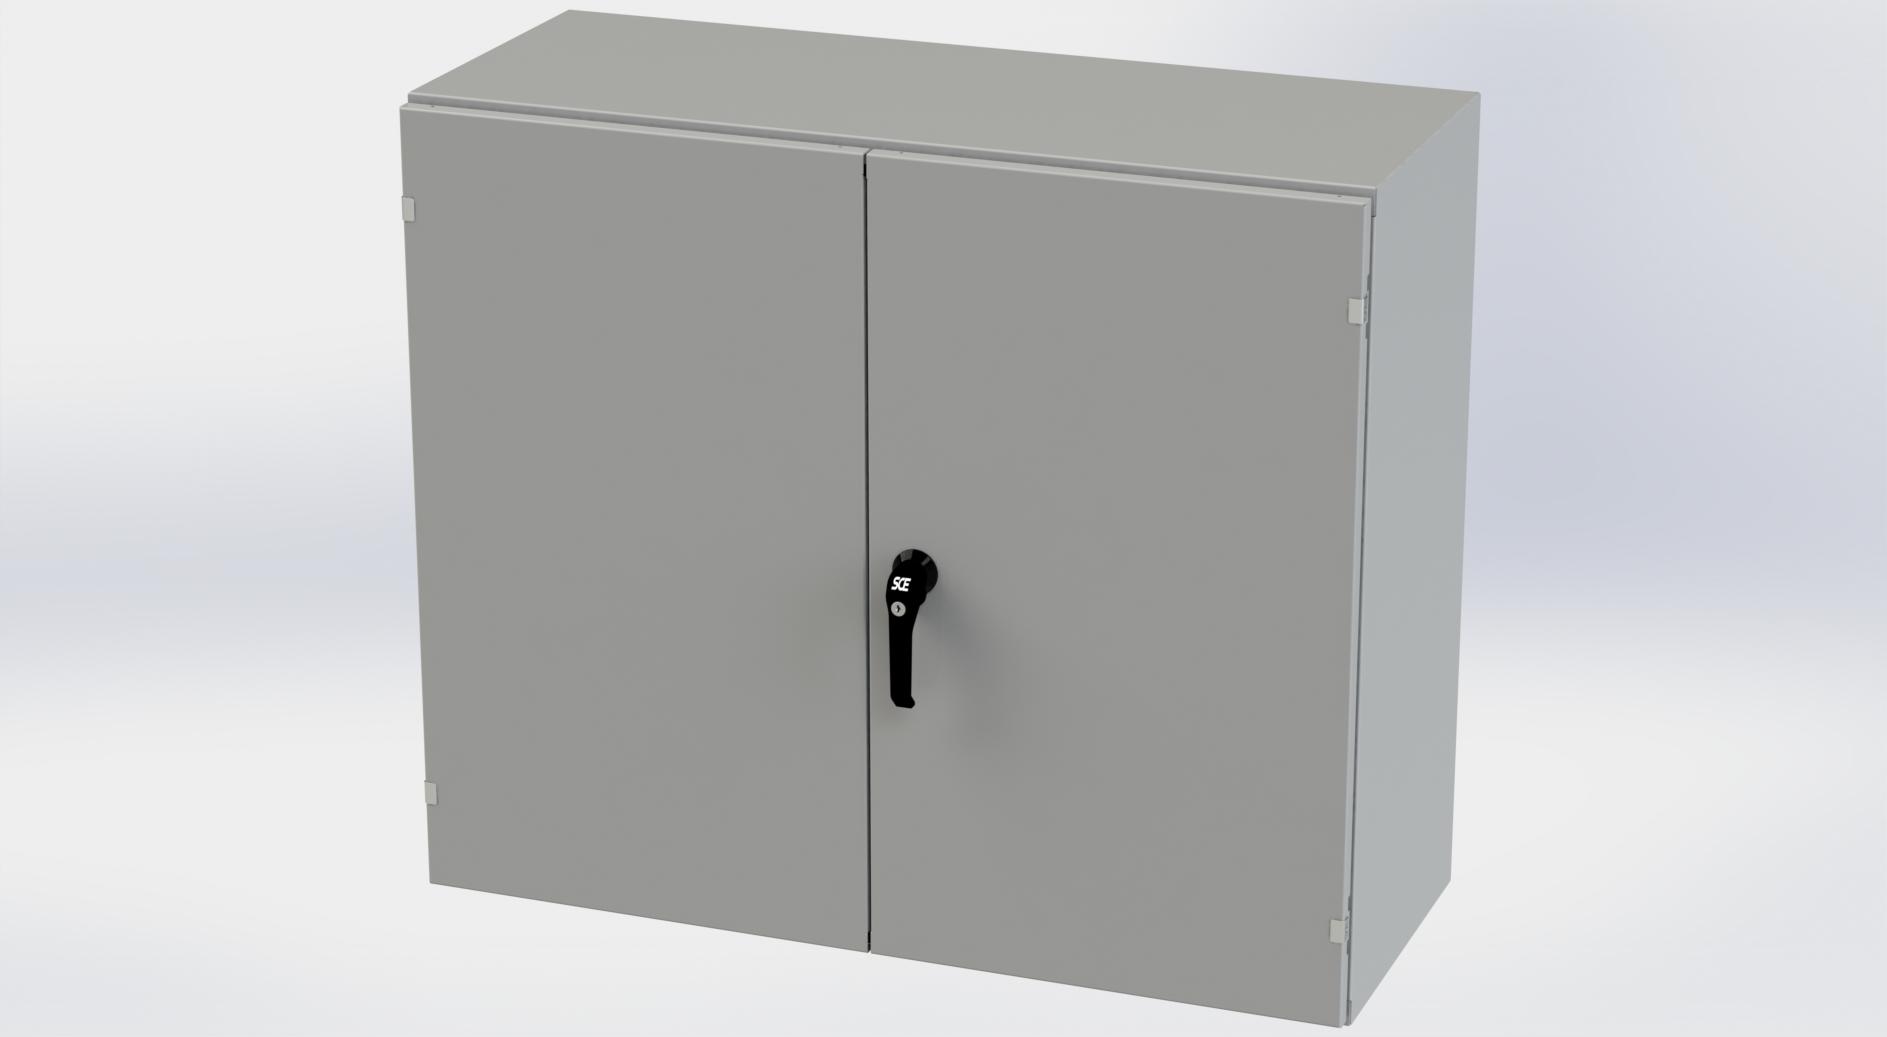 Saginaw Control SCE-364216WFLP WFLP Enclosure, Height:36.00", Width:42.00", Depth:16.00", ANSI-61 gray powder coating inside and out.